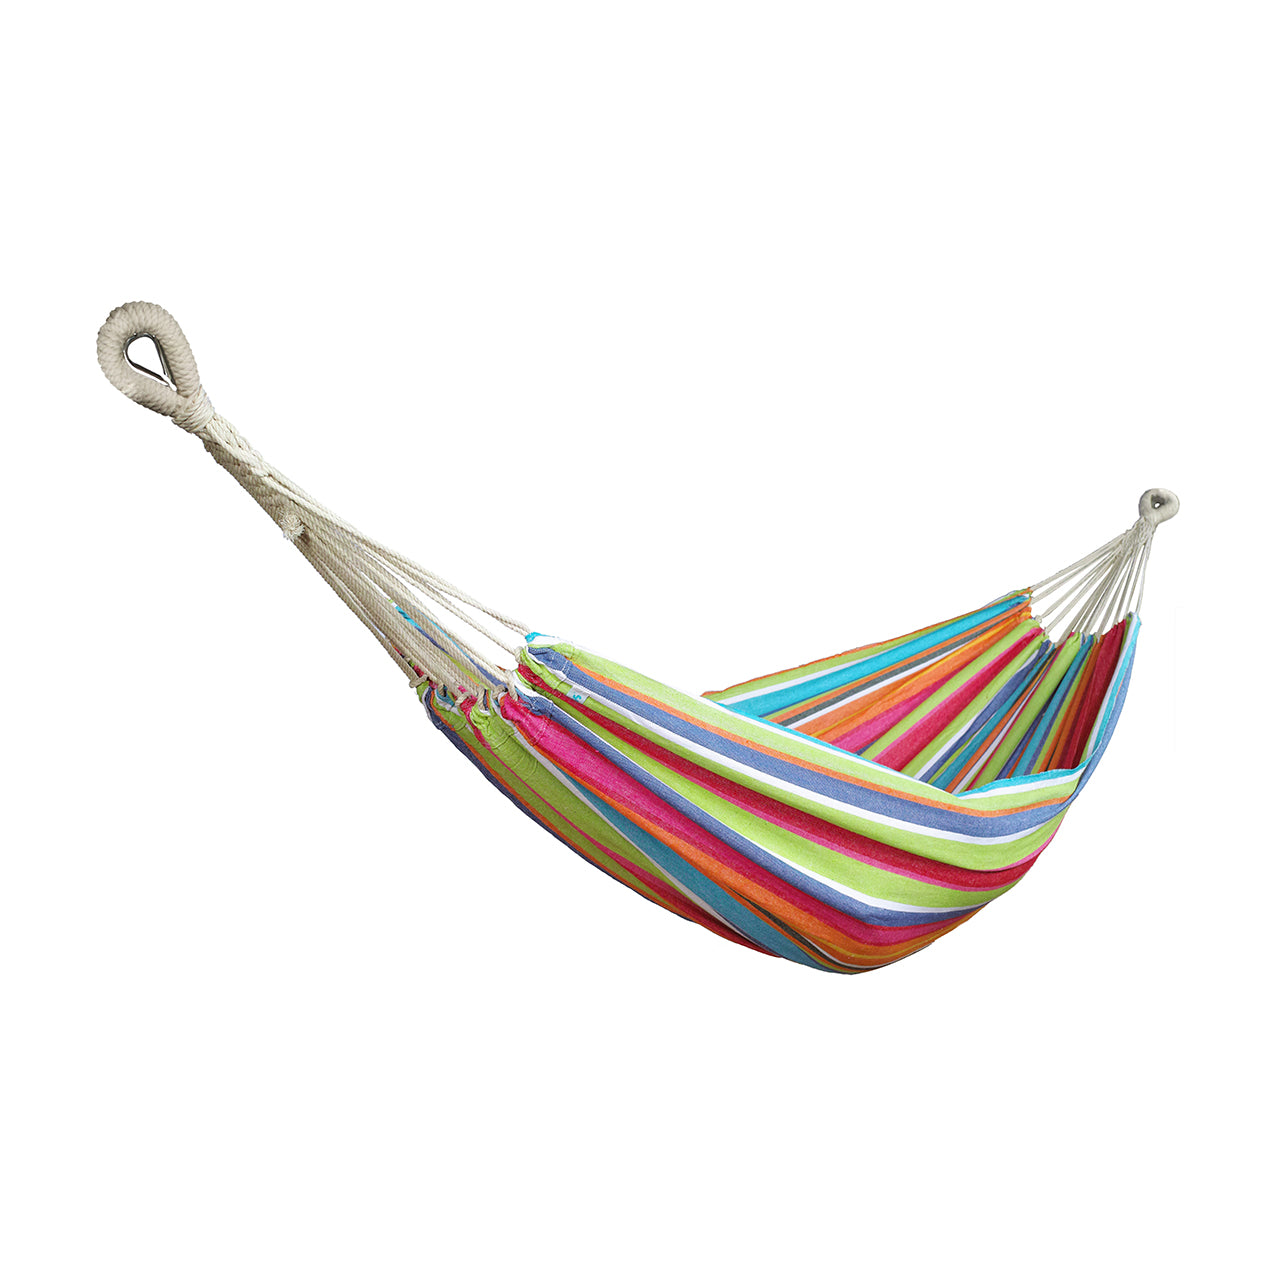 Bliss Hammocks 60-inch Wide Double Hammock in a Bag with Hand-woven Rope loops in the Tropical Fruit Stripe variation.